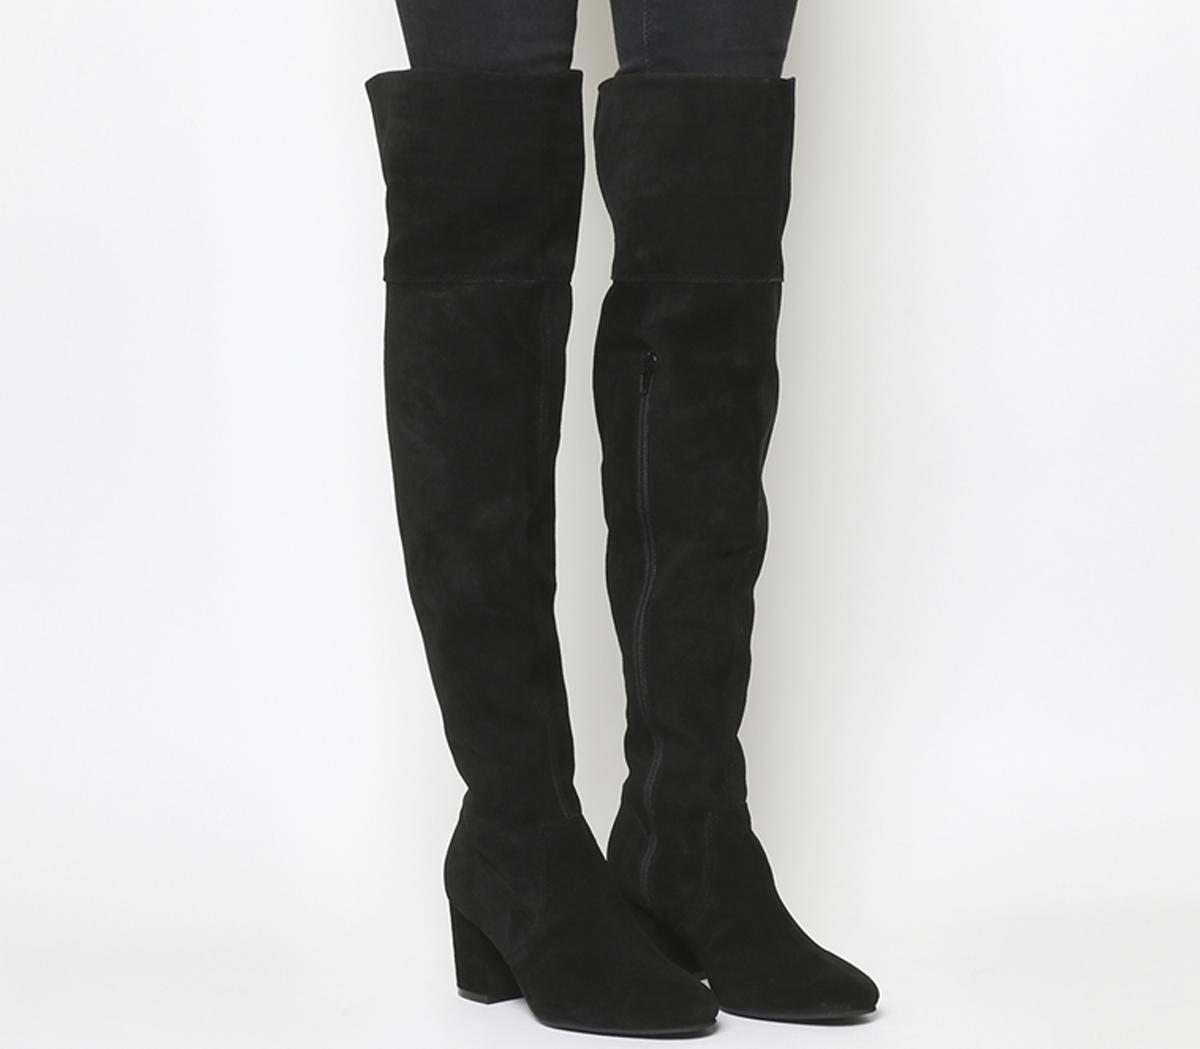 converse knee high boots for sale